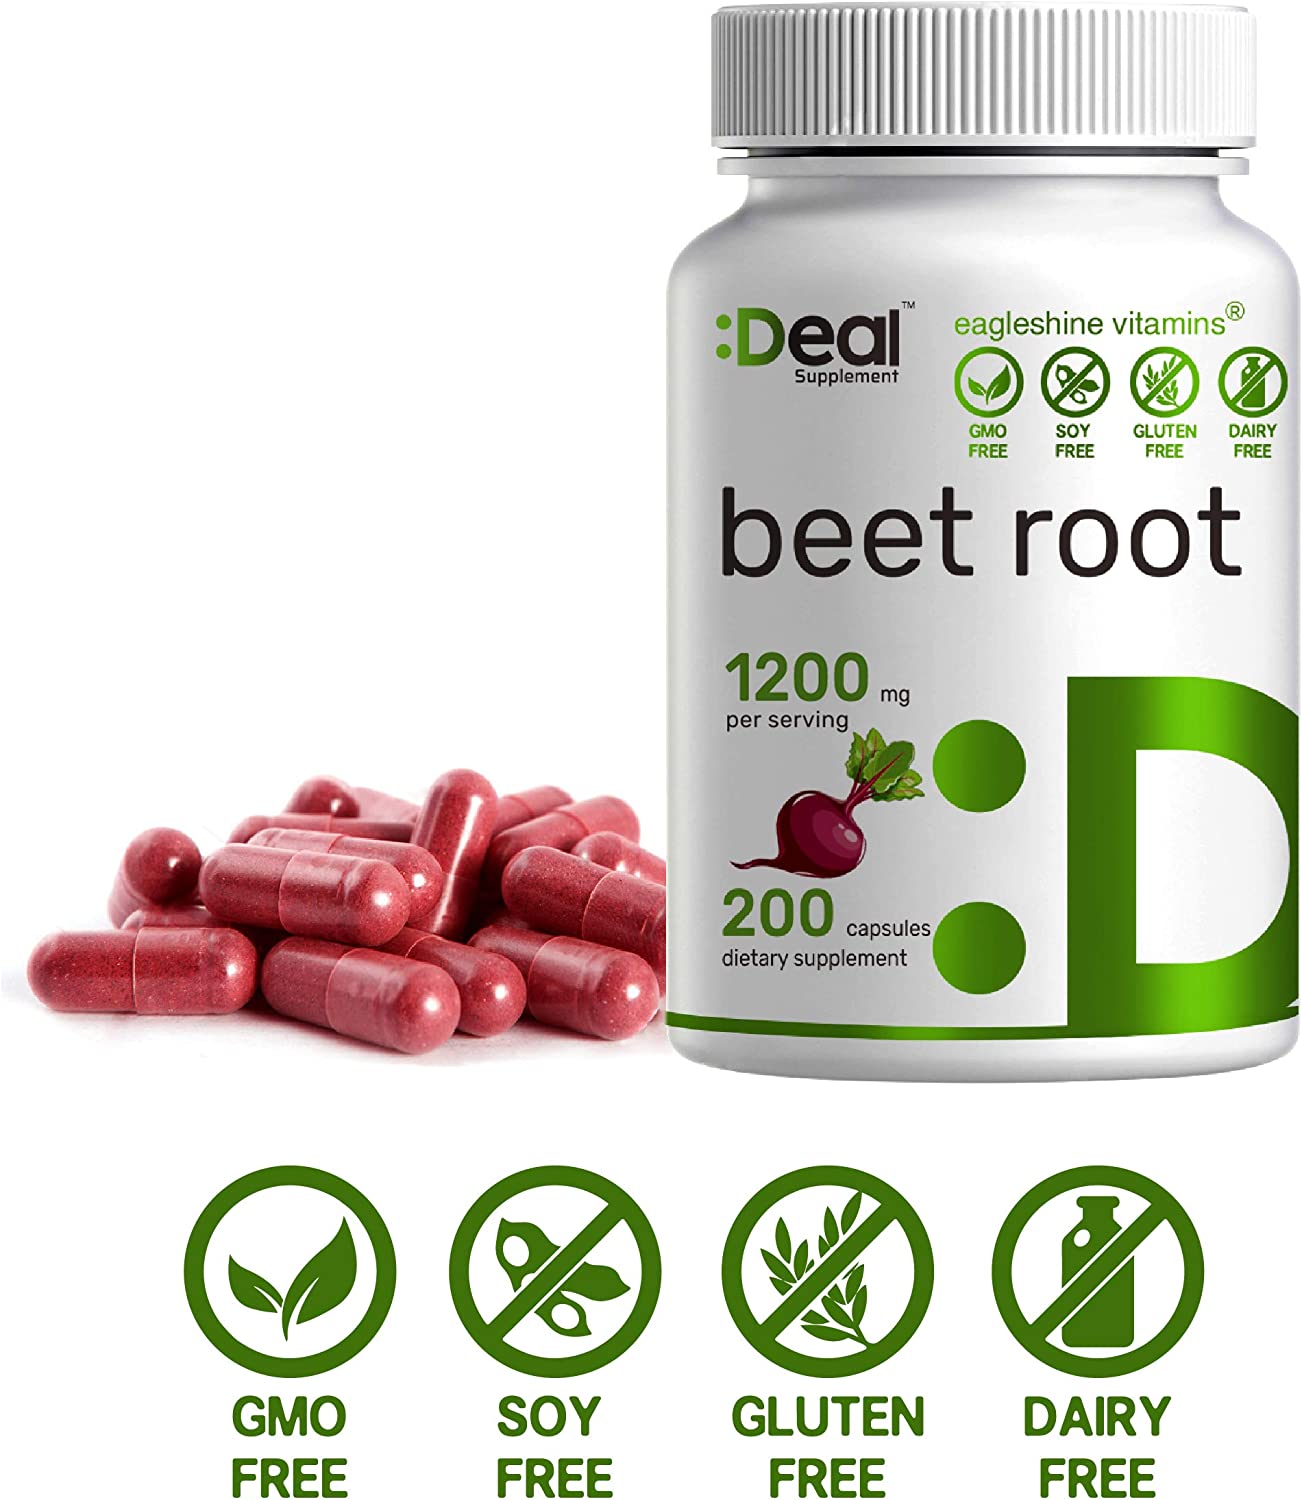 Deal Supplement Beet Root Capsules,1200mg Per Serving, 200 Count ...